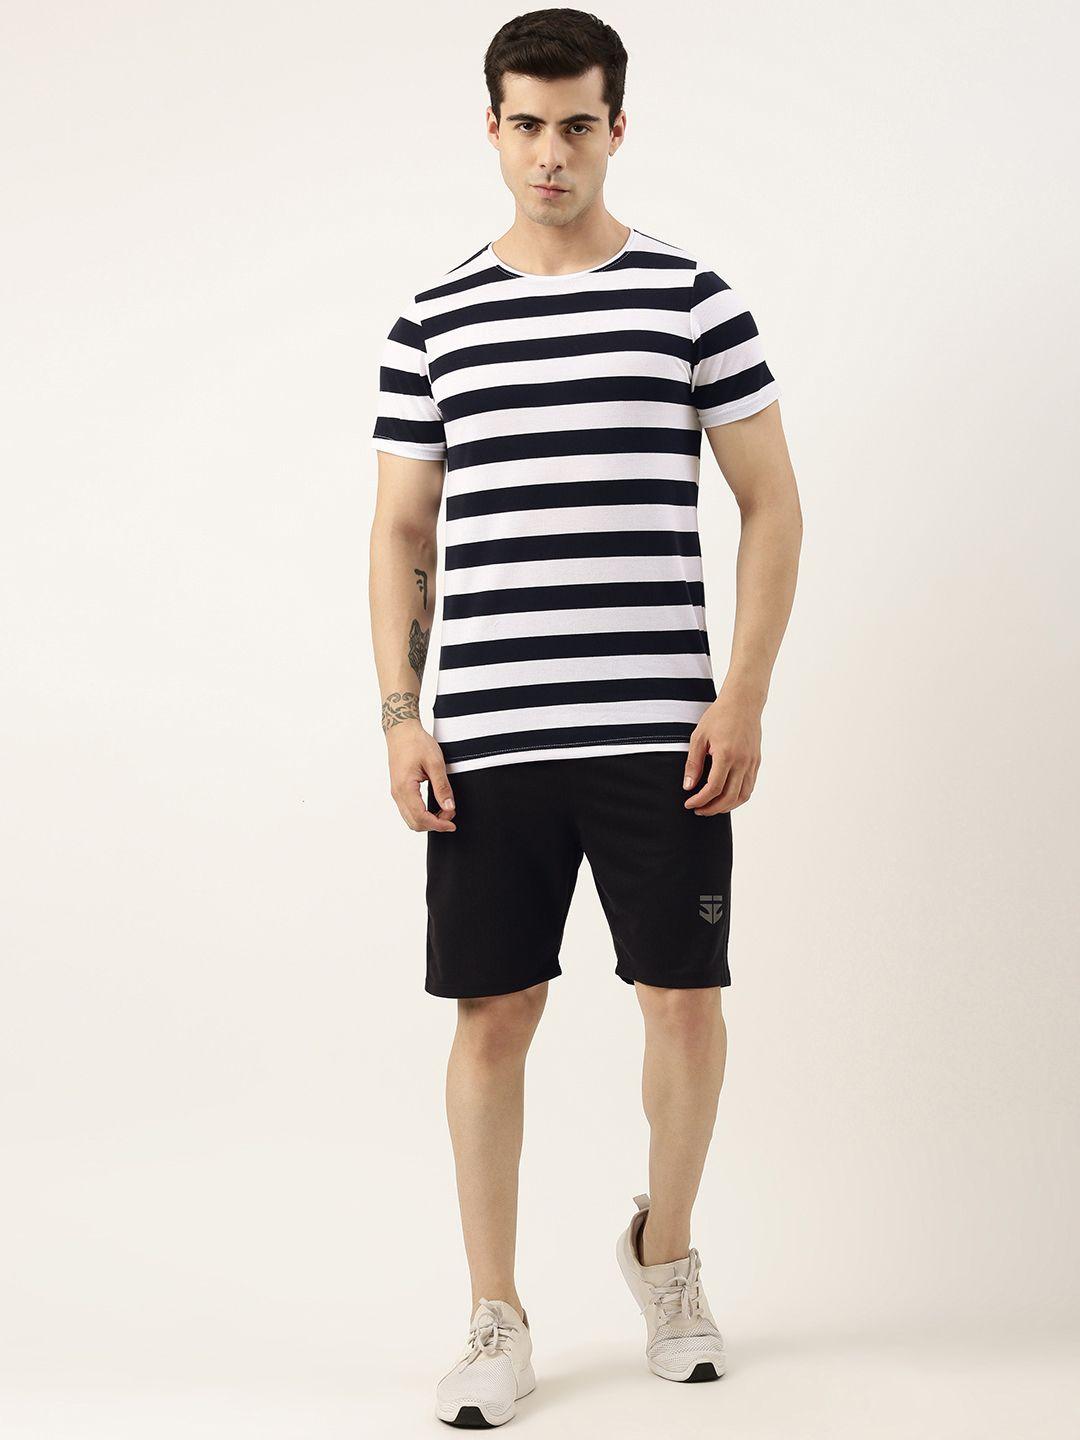 sports52 wear men striped t-shirt with shorts training tracksuit